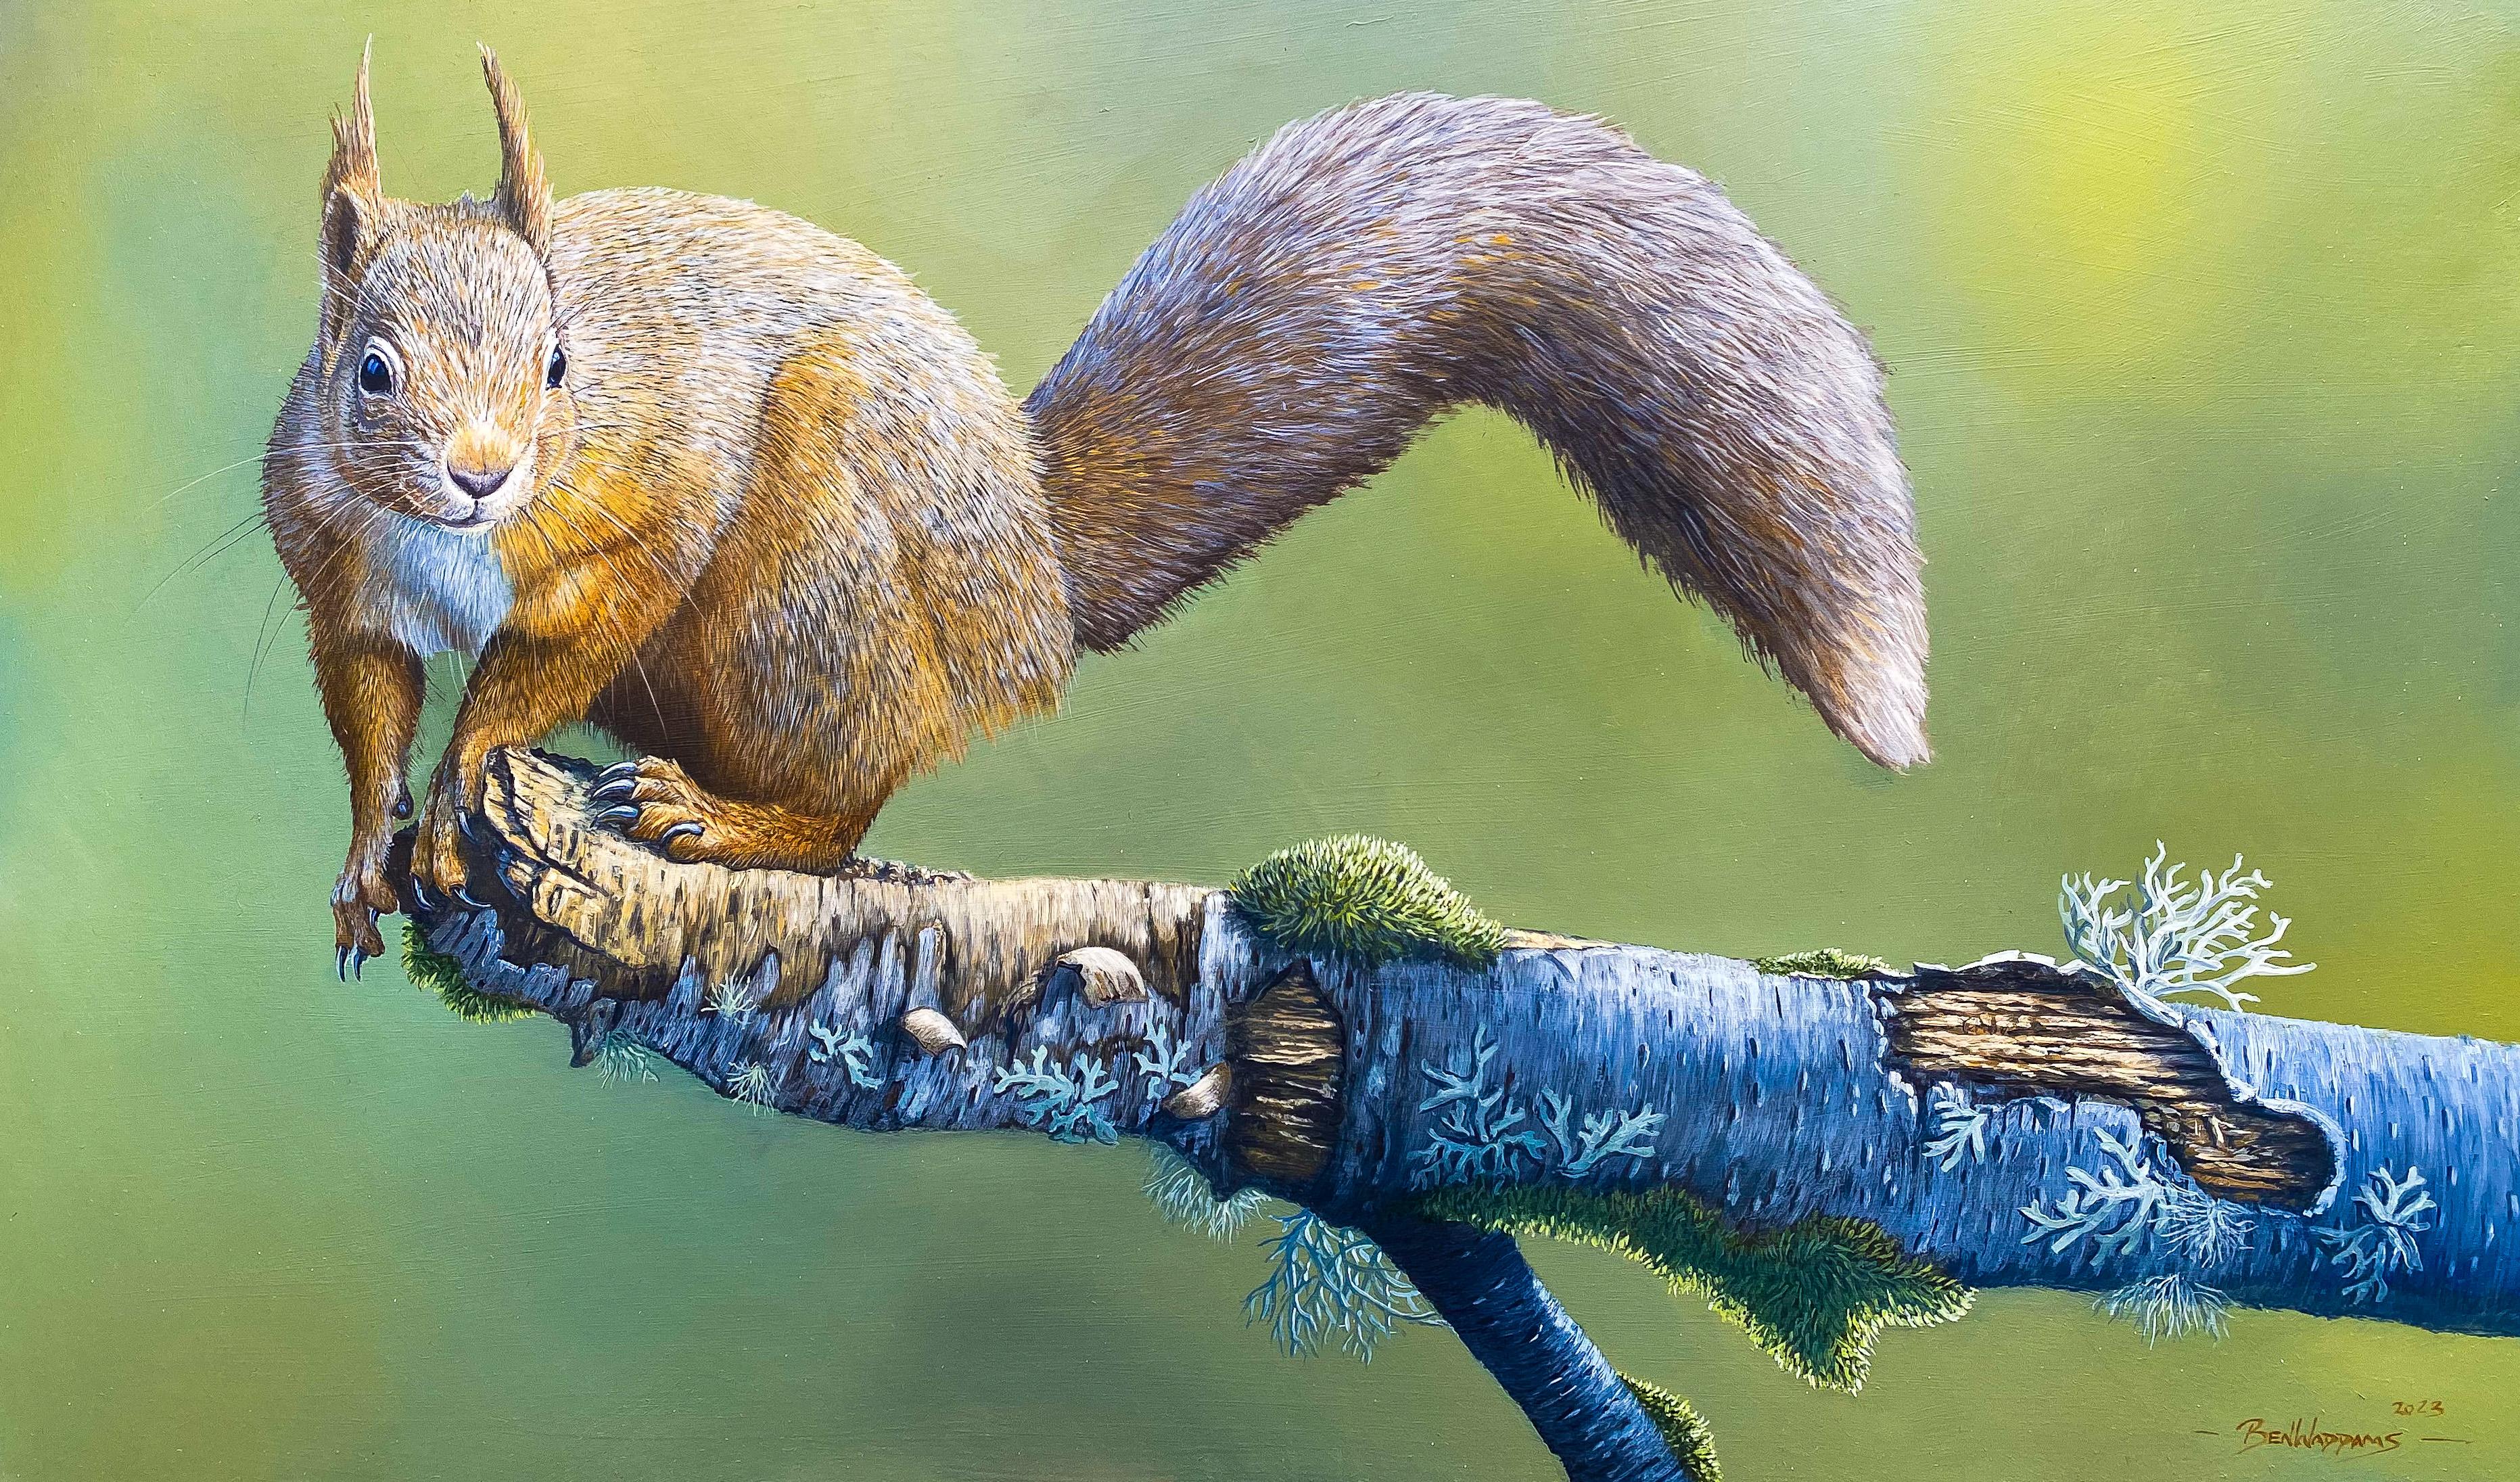 Ben Waddams Animal Painting - End of the Road Photorealist painting of a red squirrel on a tree branch, green